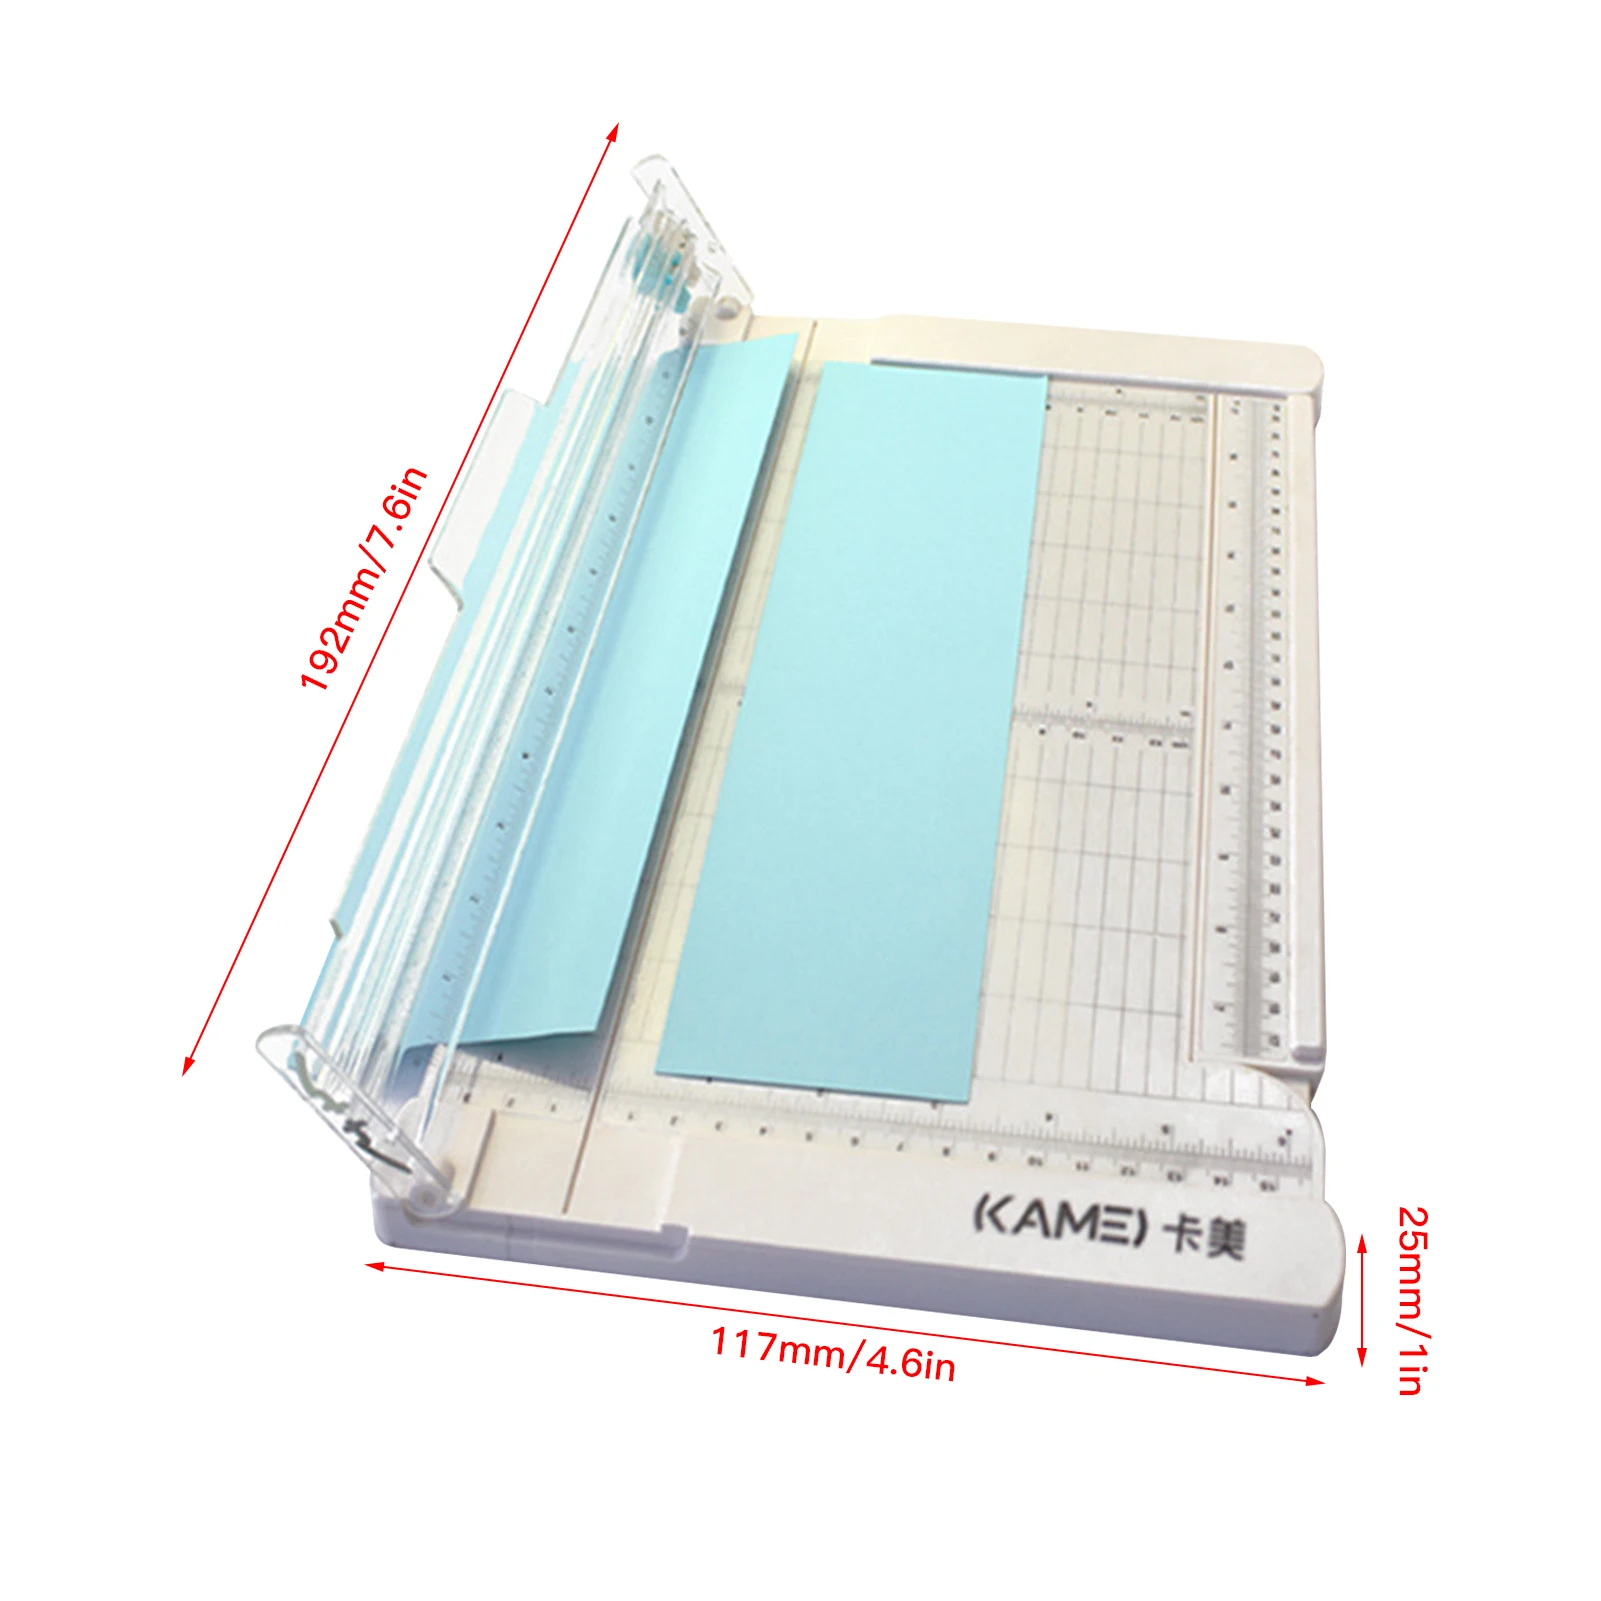 KW-triO Paper Trimmer Guillotine 6 Inch (160mm) Cut Length Desktop Paper  Cutting Machine with Head for Craft Paper Photos Cards Scrapbooking Office